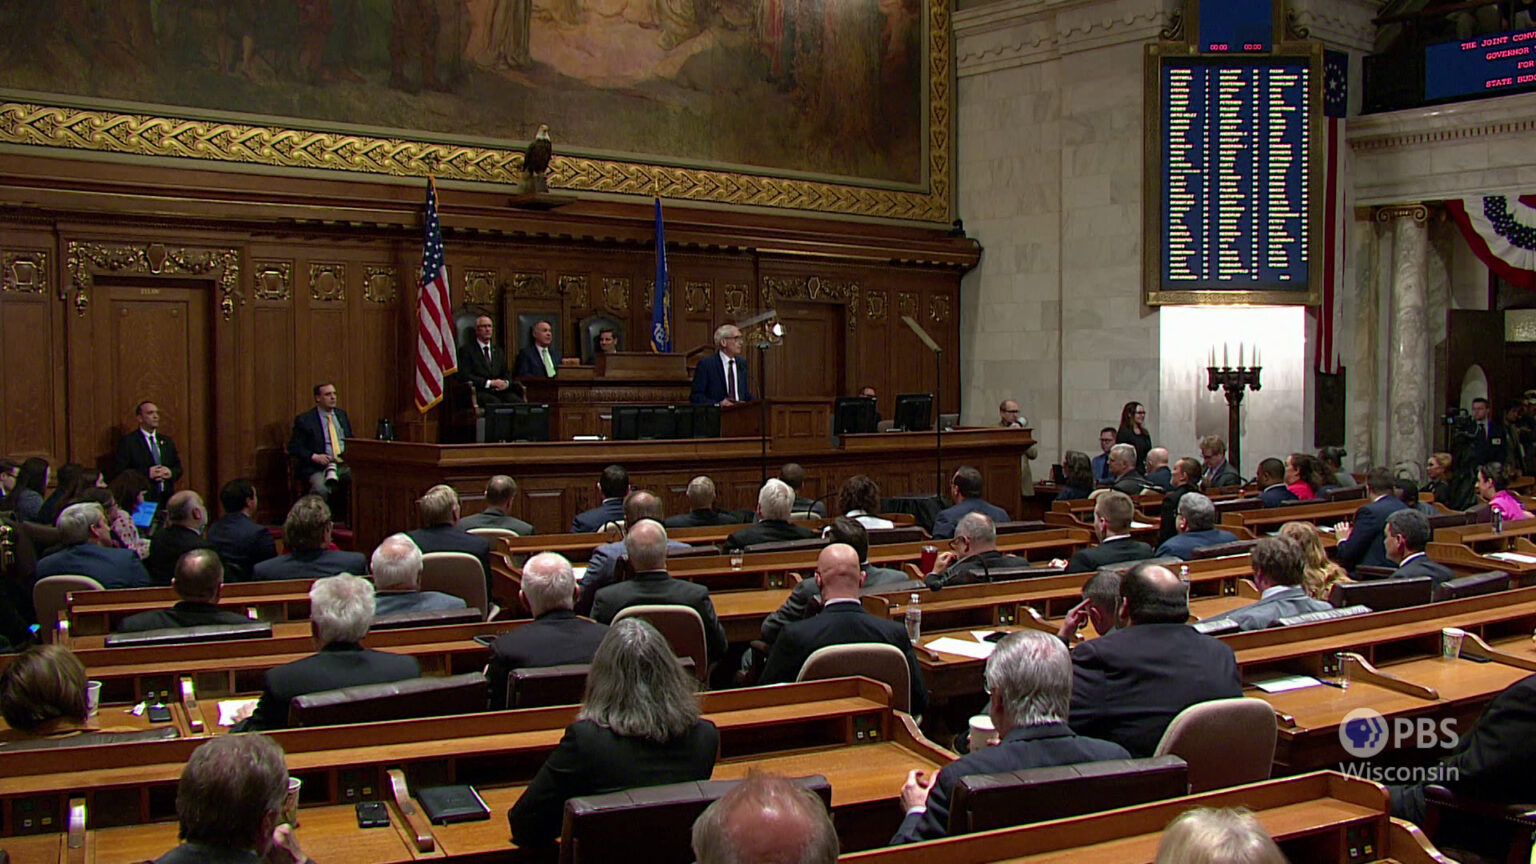 People seated in multiple rows of wooden desks face a dais where three people sit in high-backed chairs behind Tony Evers, who stands behinds a podium and speaks, with a U.S. and Wisconsin flag, carved wood panels, a taxidermy bald eagle and a large painting on the wall behind them, with an electronic vote display mounted on an adjacent marble block wall, and more people seated and standing on either side.